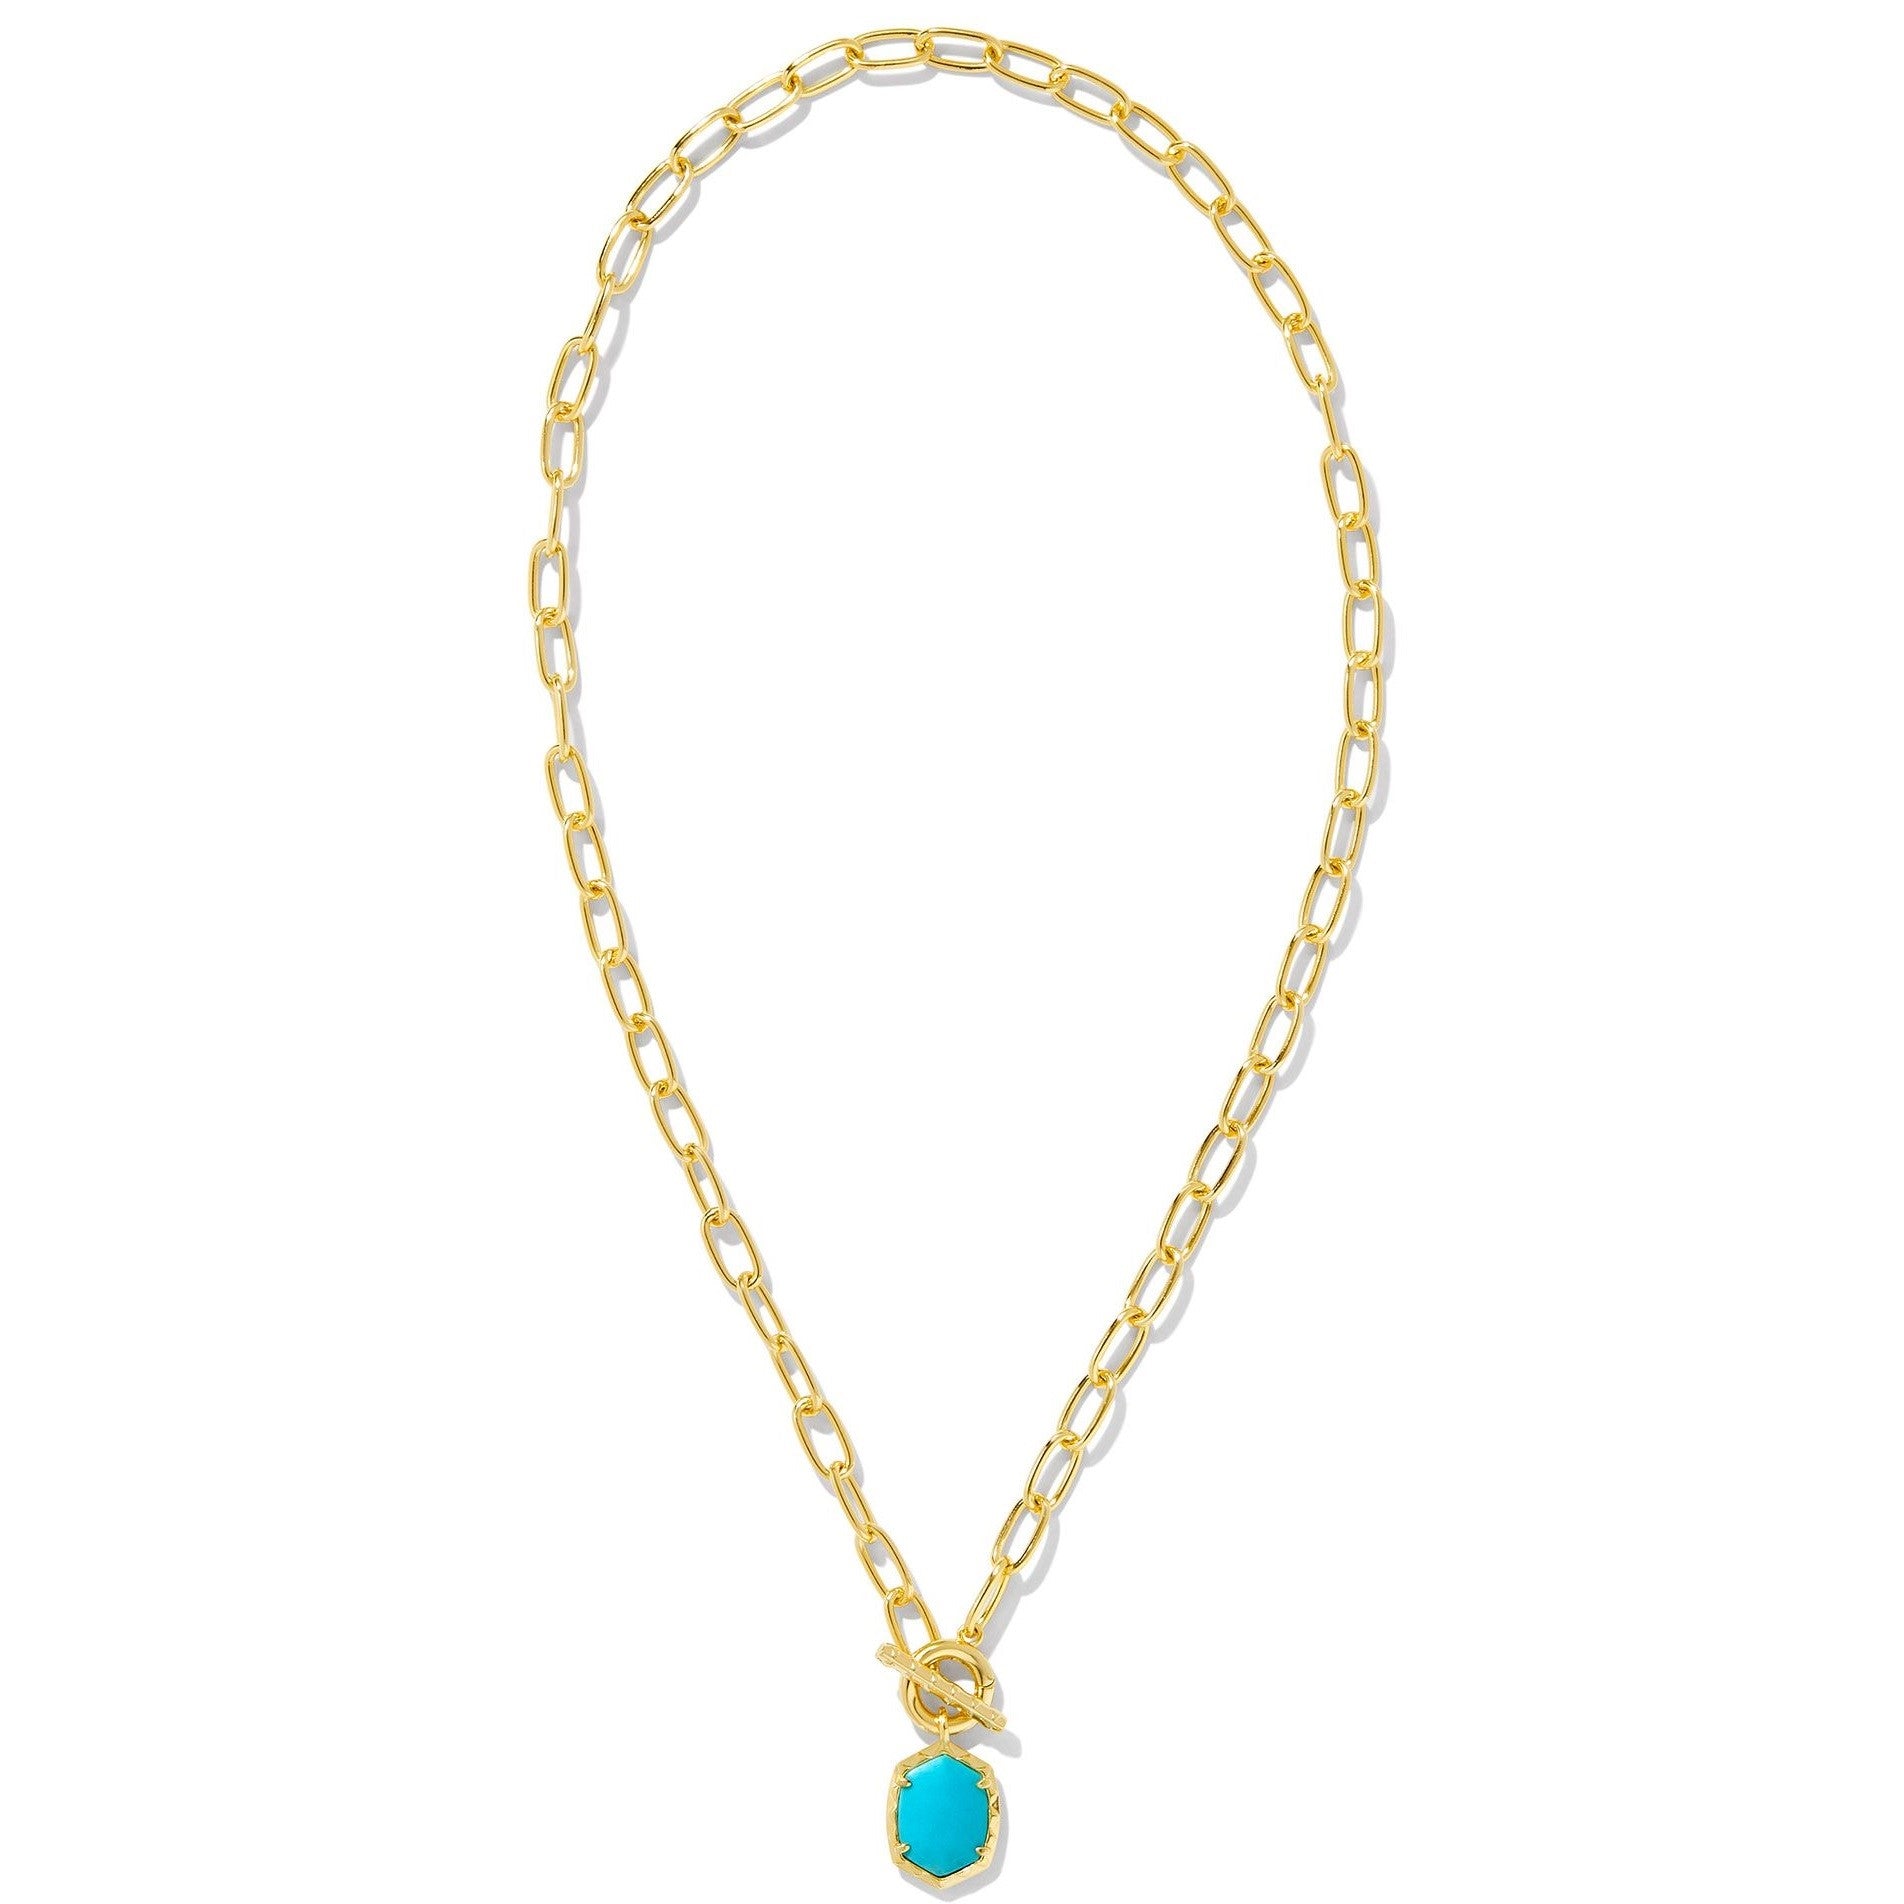 Kendra Scott | Daphne Gold Link and Chain Necklace in Variegated Turquoise Magnesite - Giddy Up Glamour Boutique